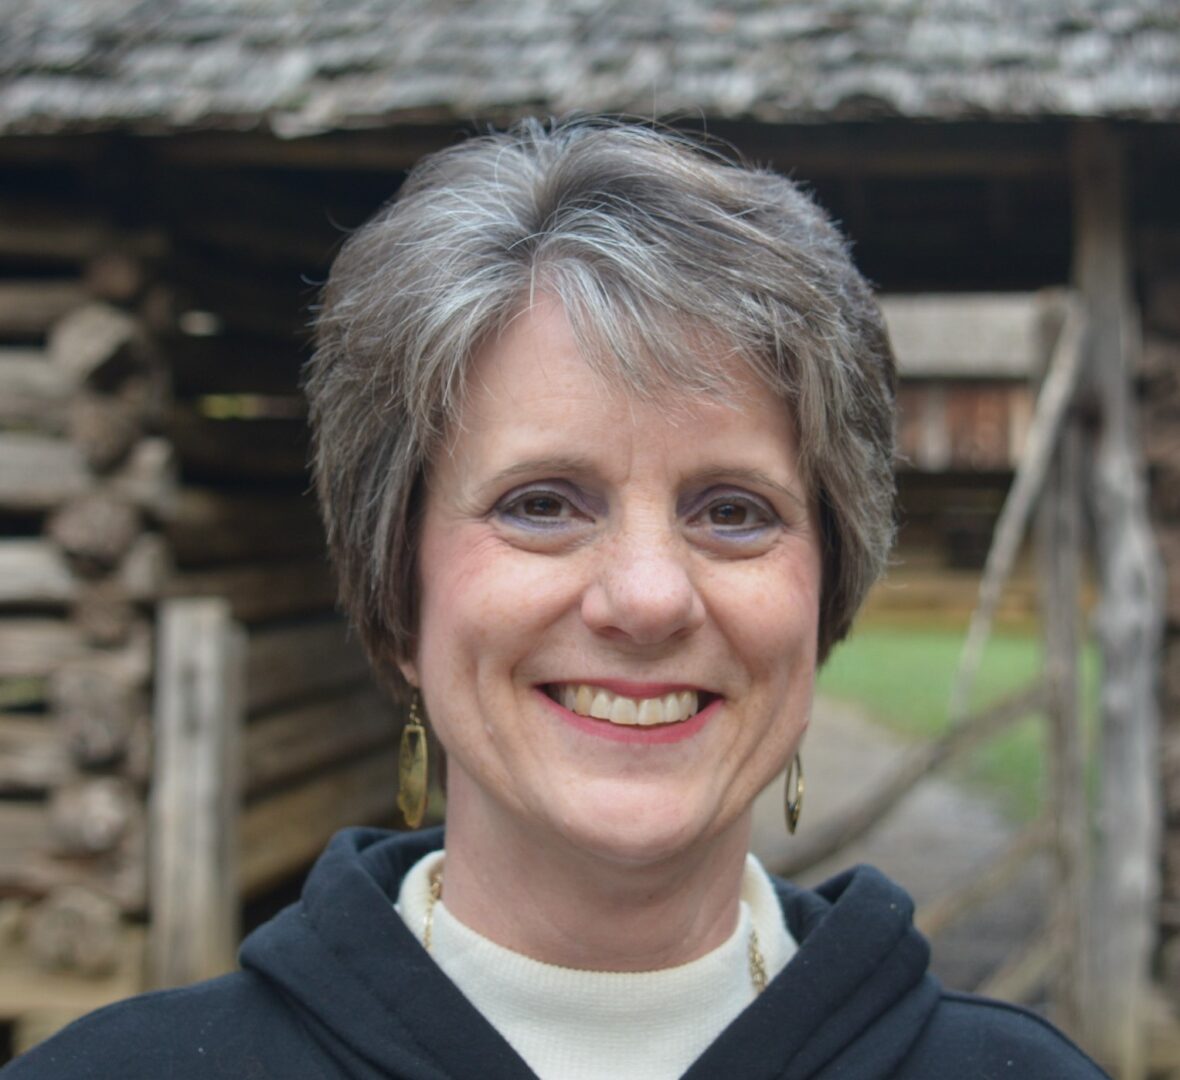 A woman with short hair is smiling for the camera.